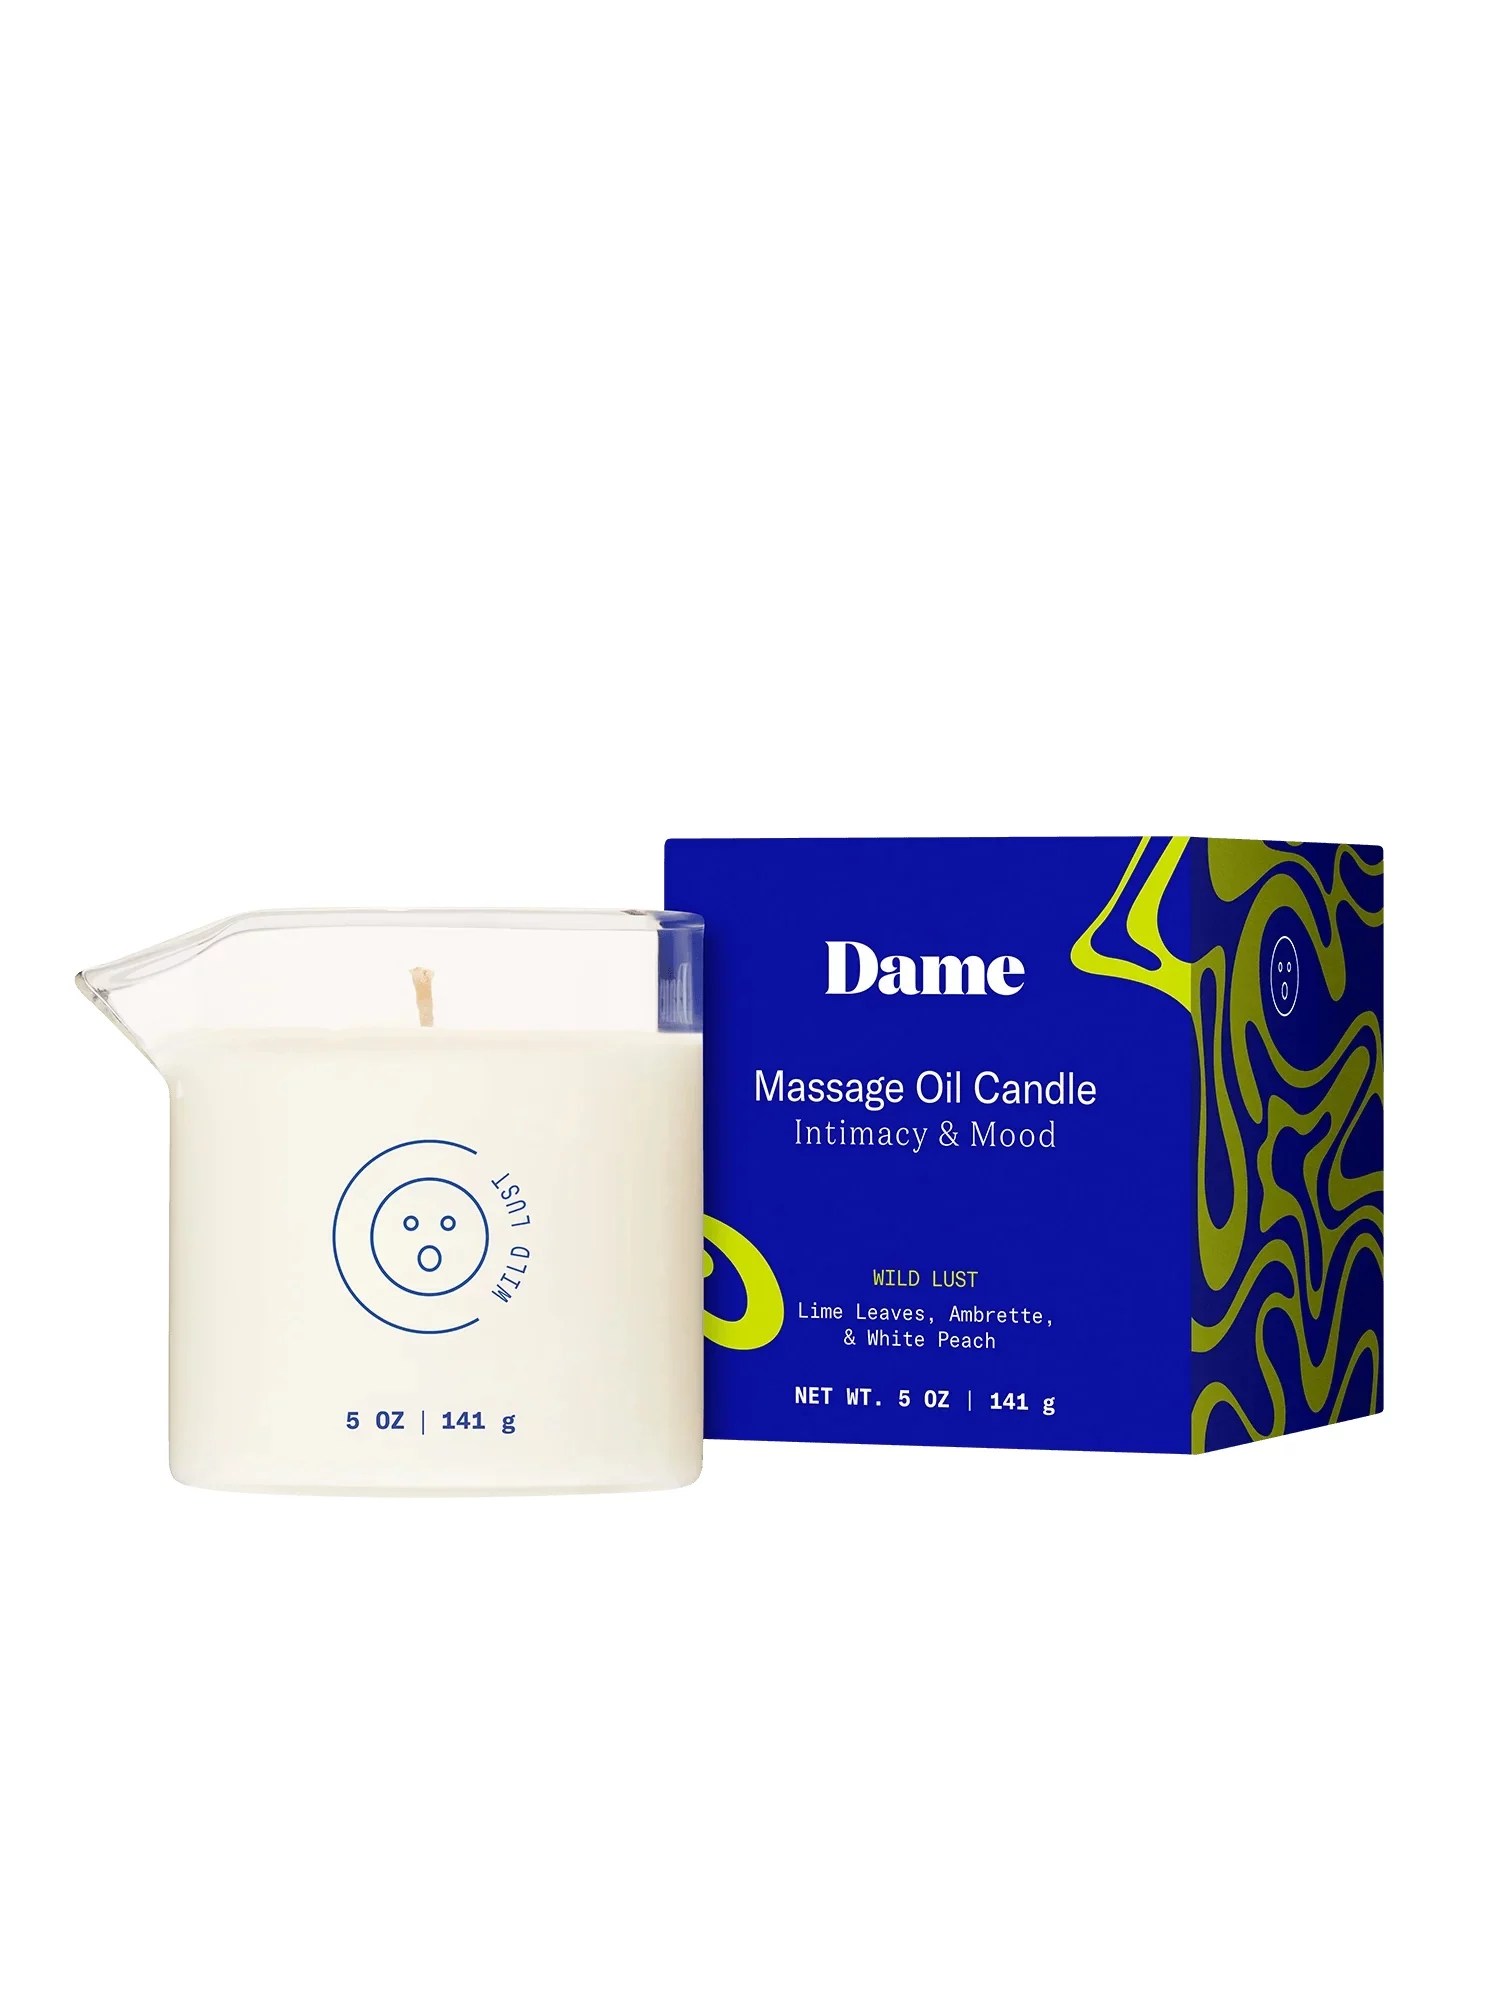 Dame Wild Lust Massage Oil Candle